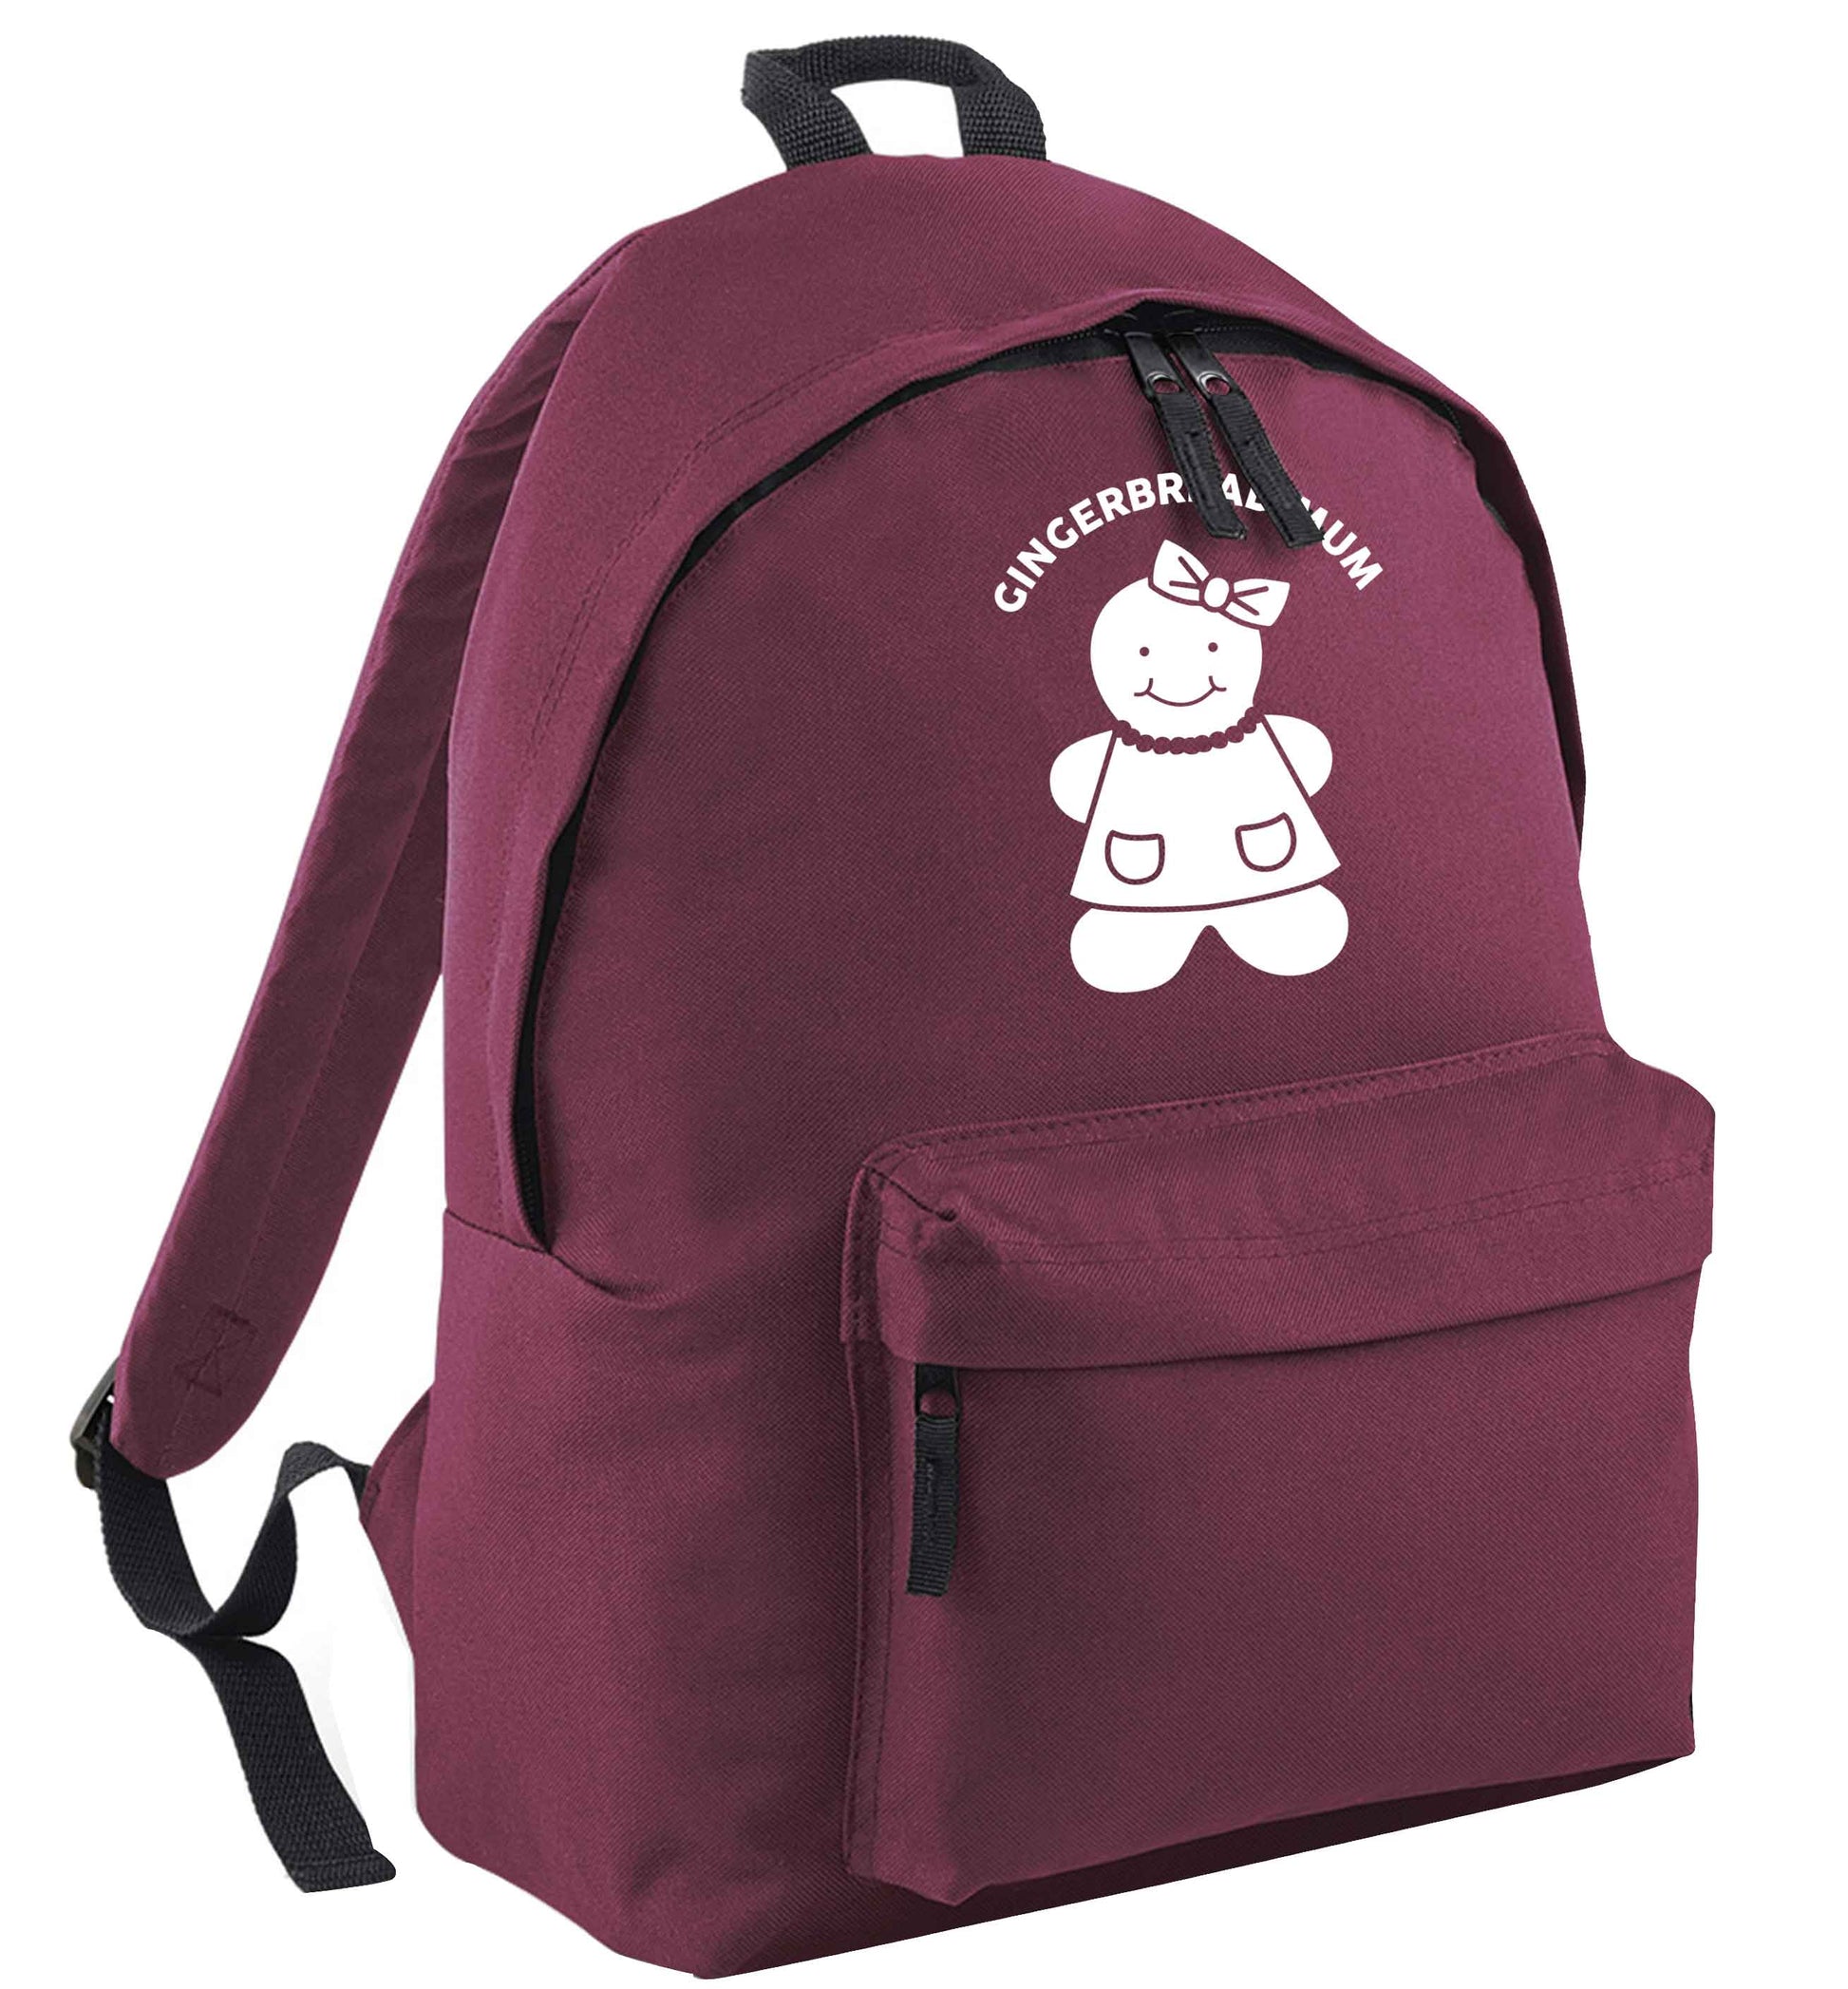 Merry Christmas maroon adults backpack